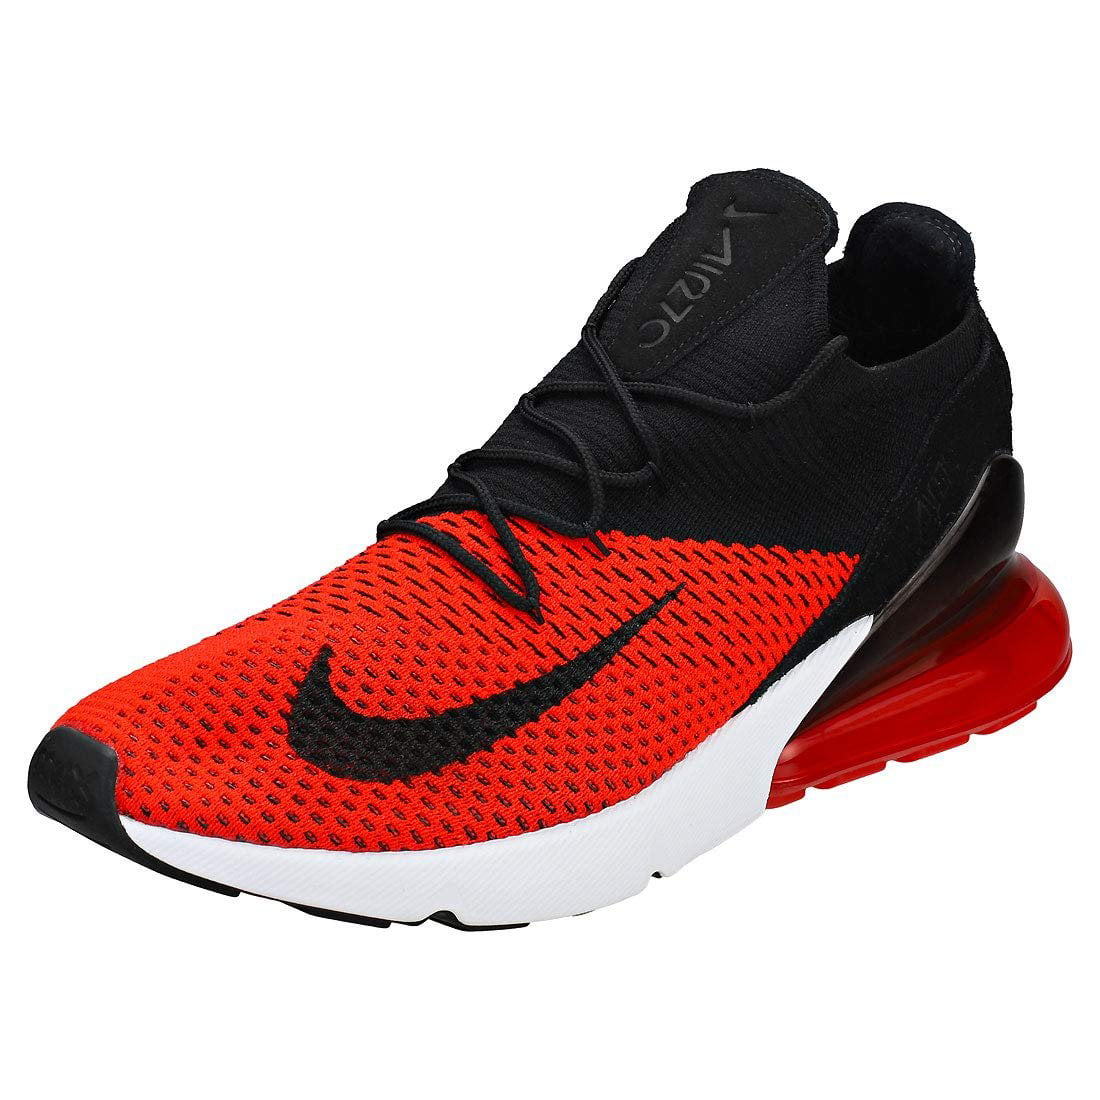 Nike Air Max 270 Flyknit - Men's Chili Red/Black/Challenge Red/White Nylon  Training Shoes 11.5 DM US 